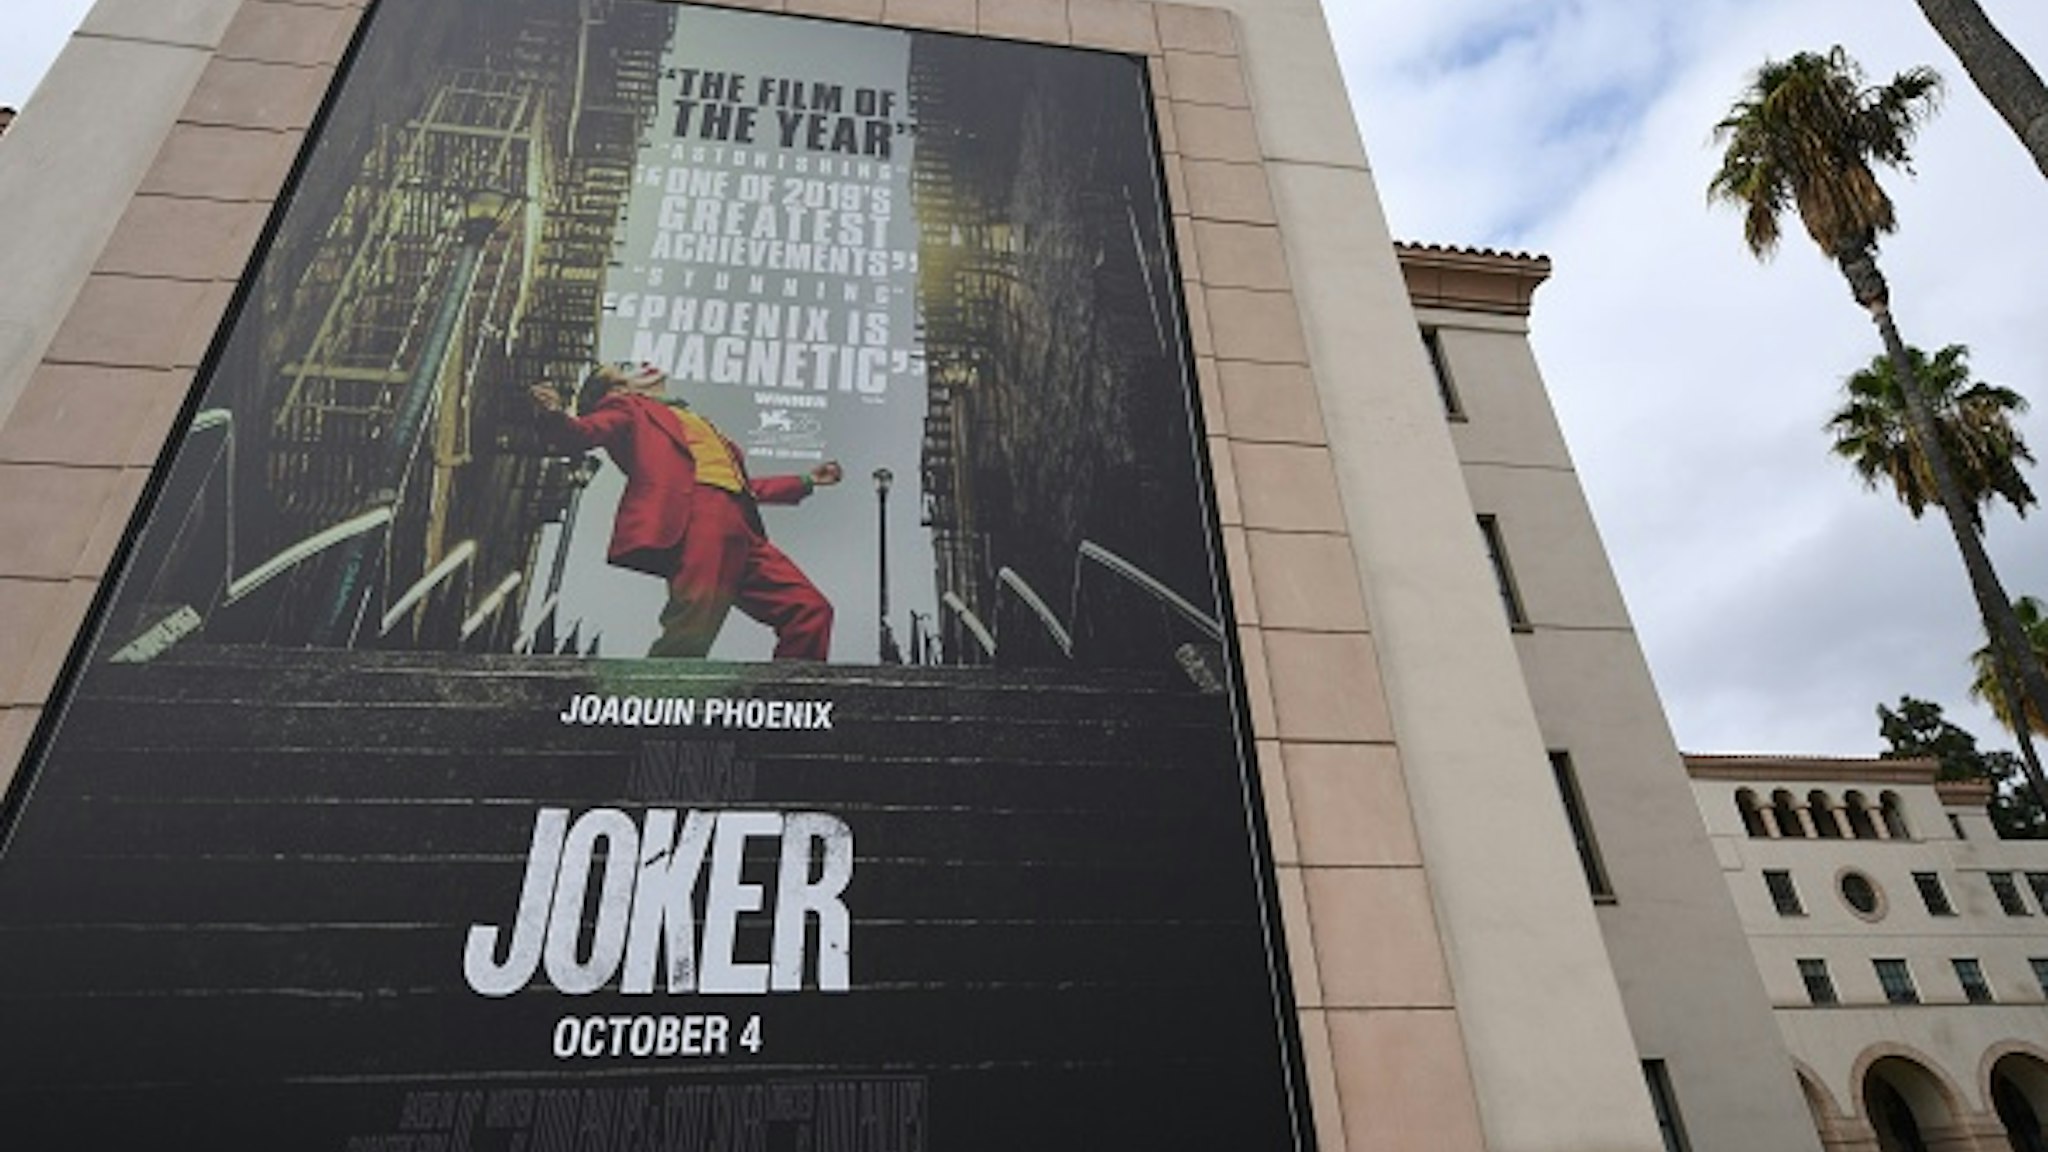 A poster for the upcoming film "The Joker" is seen outside Warner Brothers Studios in Burbank, California, September 27, 2019. - The Los Angeles Police Department said Friday it plans to step up its visibility around movie theaters for the opening of "Joker" because of heightened fears over the film's content.